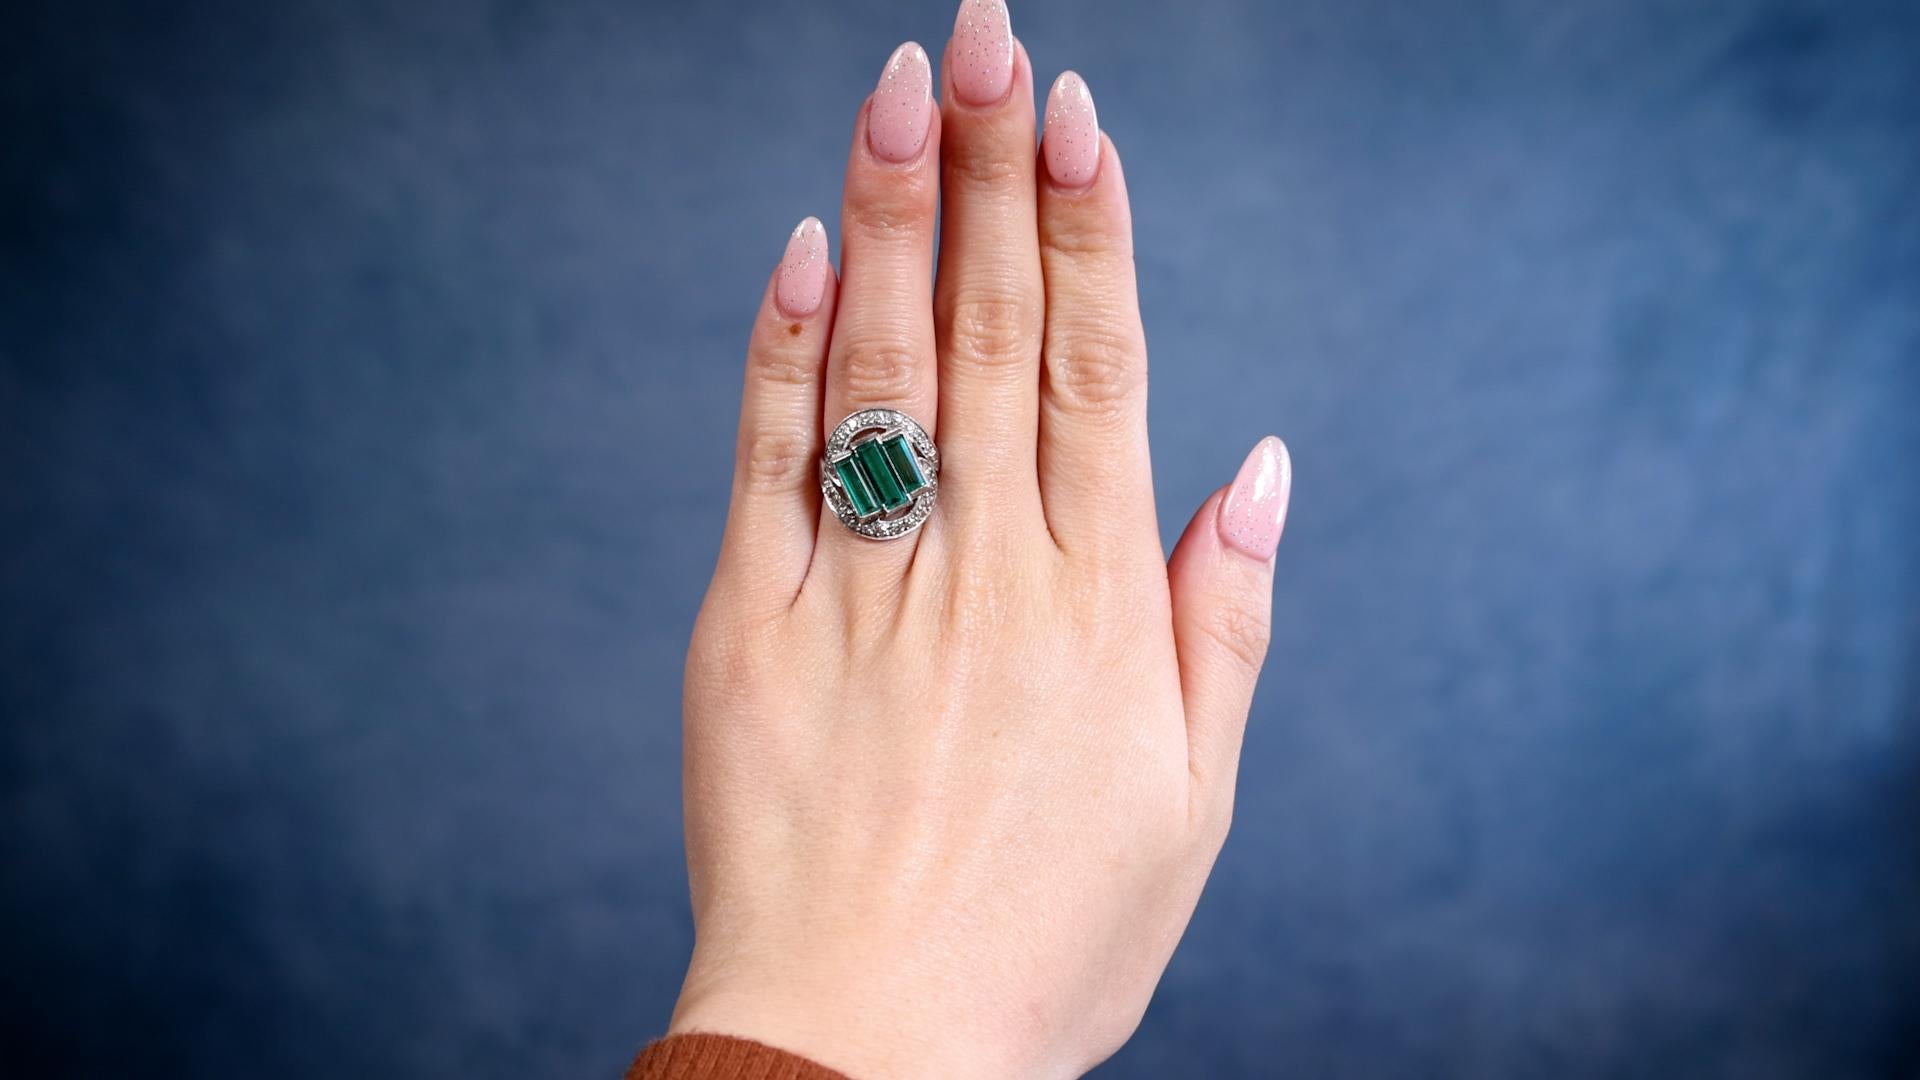 One Art Deco GIA Colombian No Oil Emerald and Diamond Platinum Ring. Featuring three rectangular step cut emeralds with a total weight of approximately 2.50 carats. Accompanied by GIA #5234160636 stating one of the emeralds is of Colombian origin